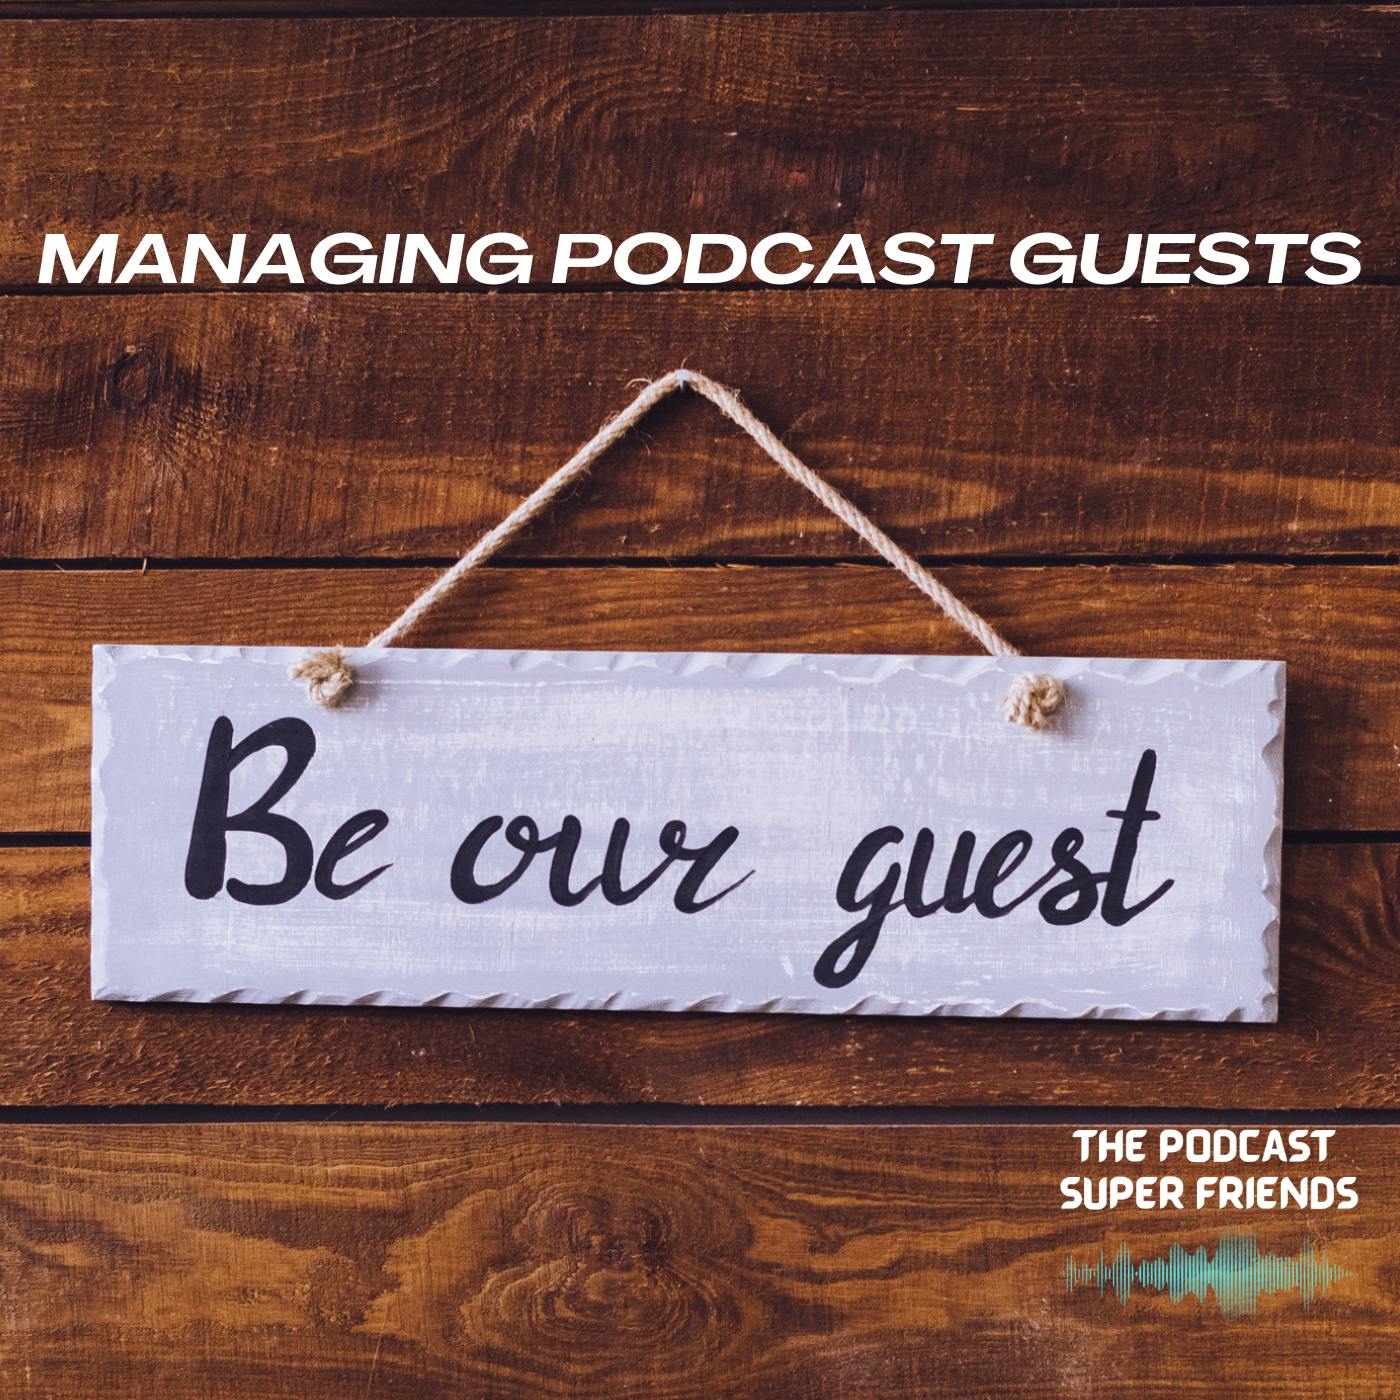 Be Our Guest: Managing Podcast Guests Image